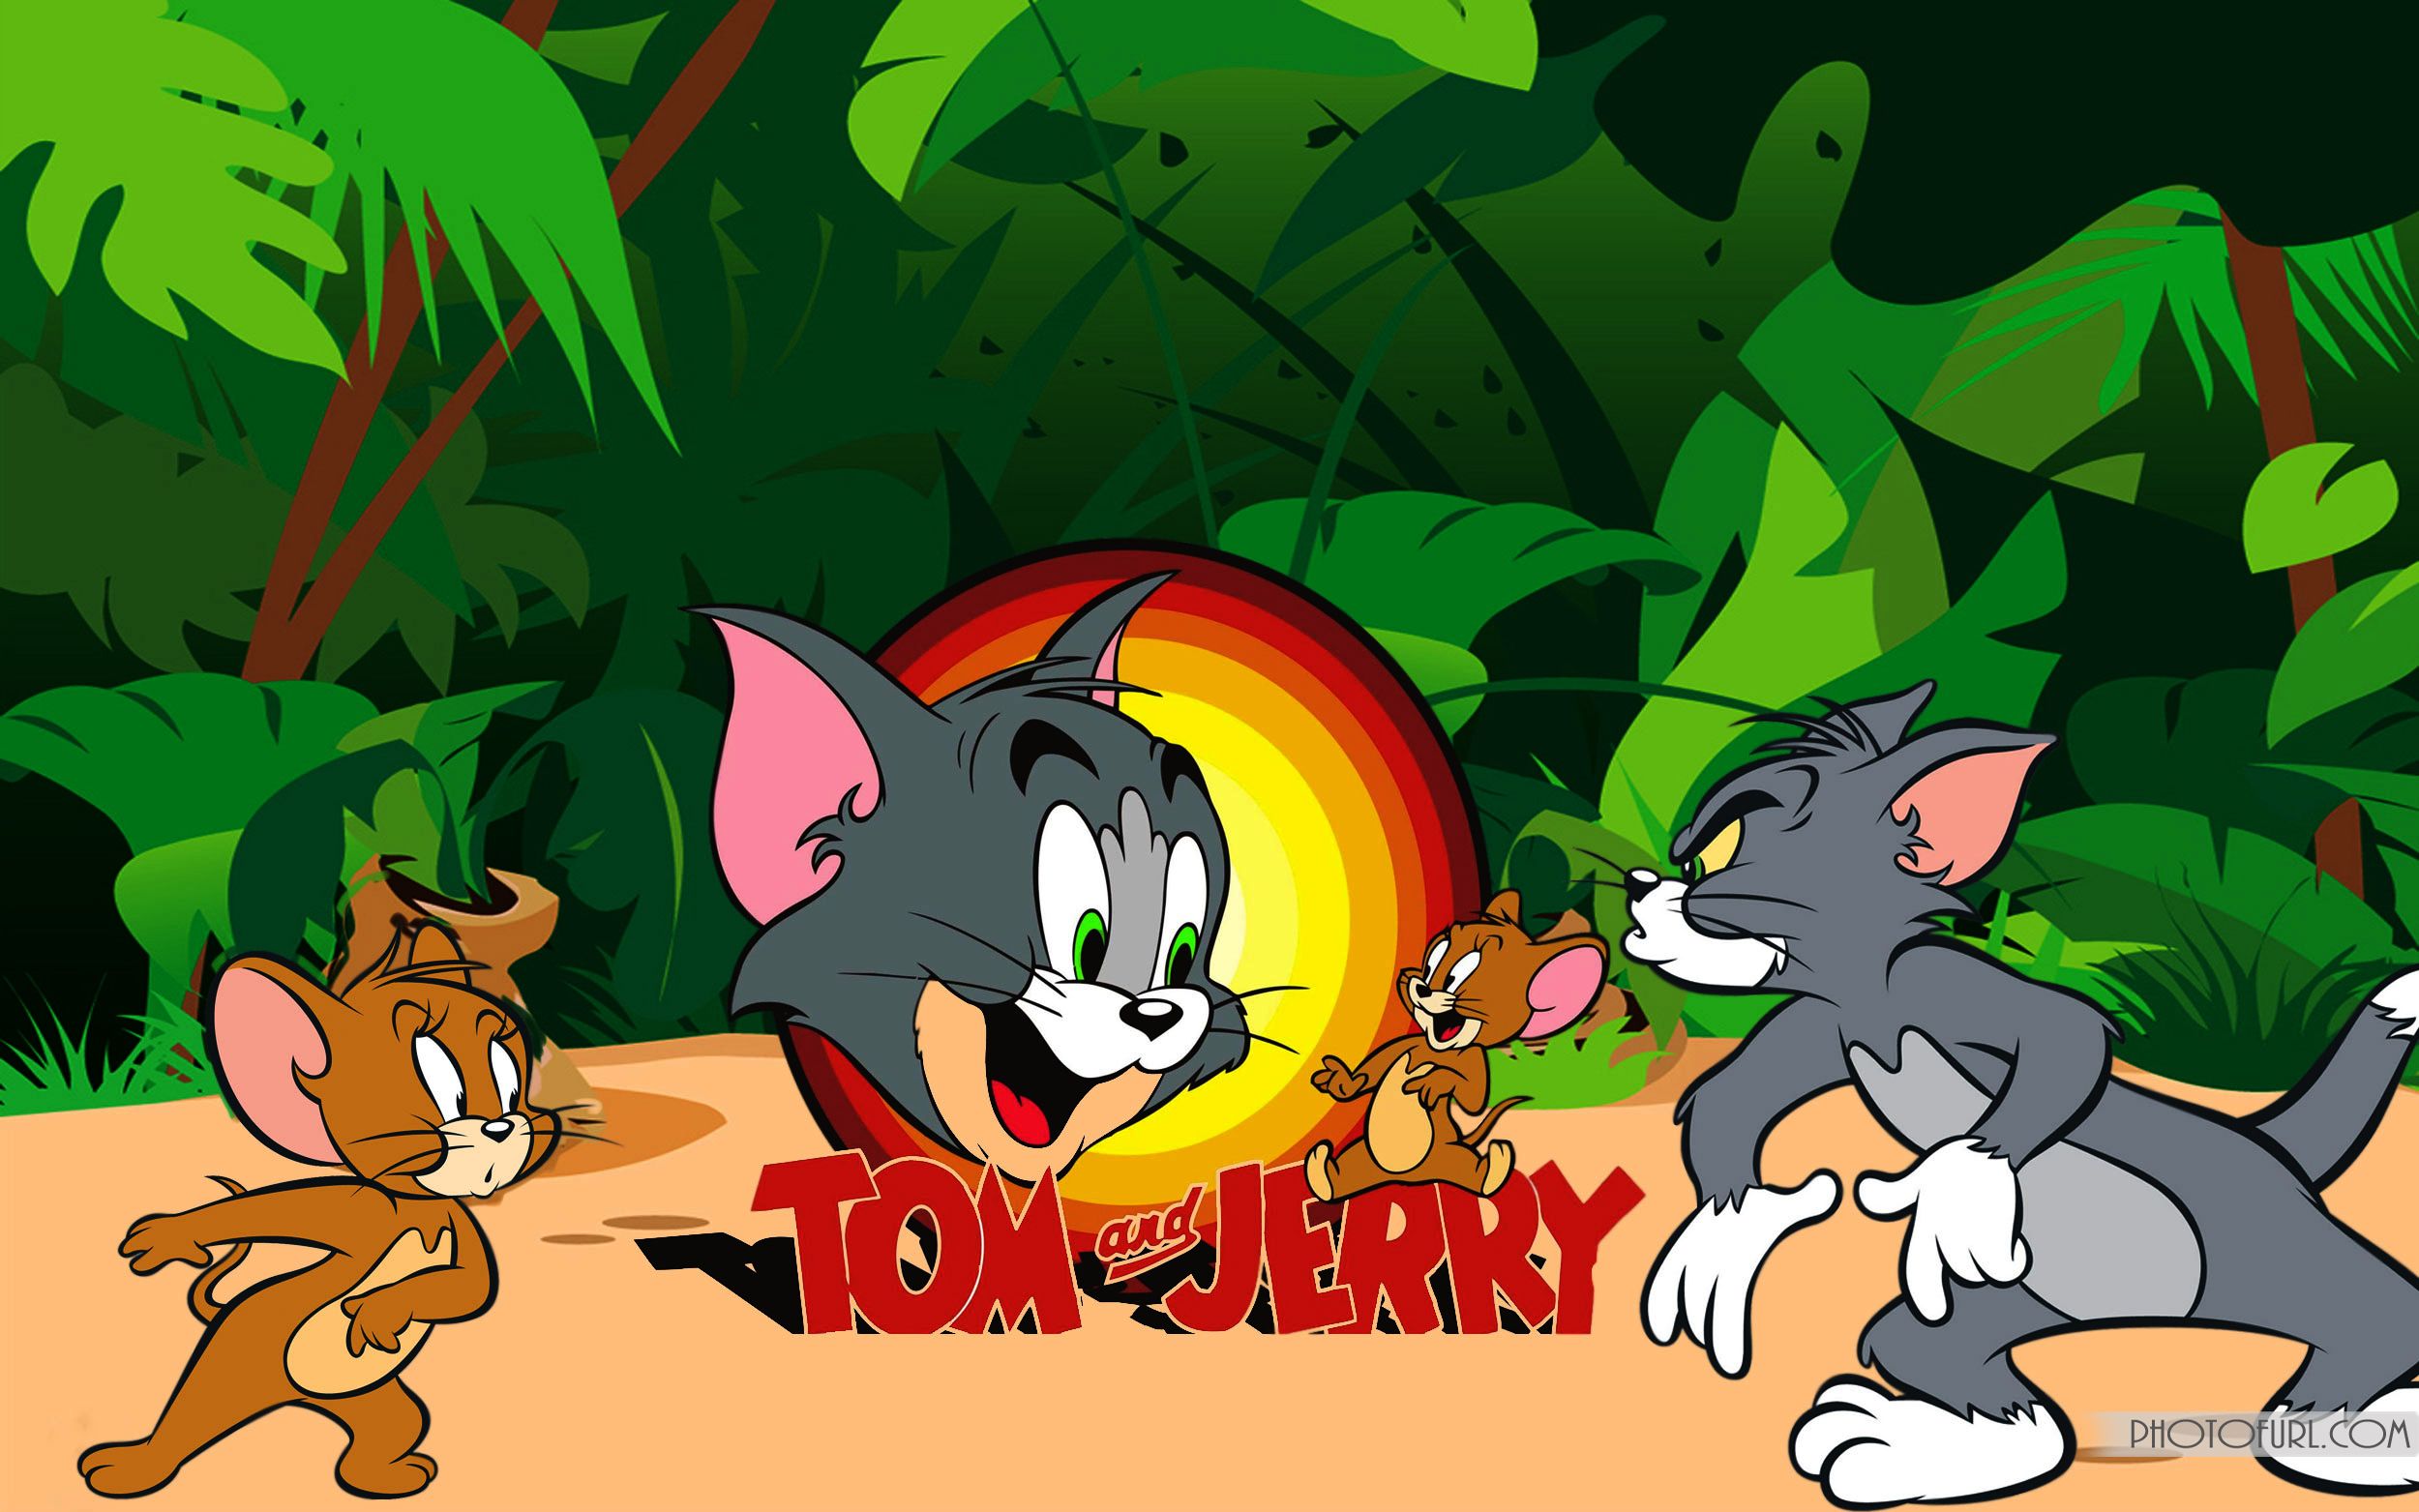 Funny Tom and Jerry Wallpaper